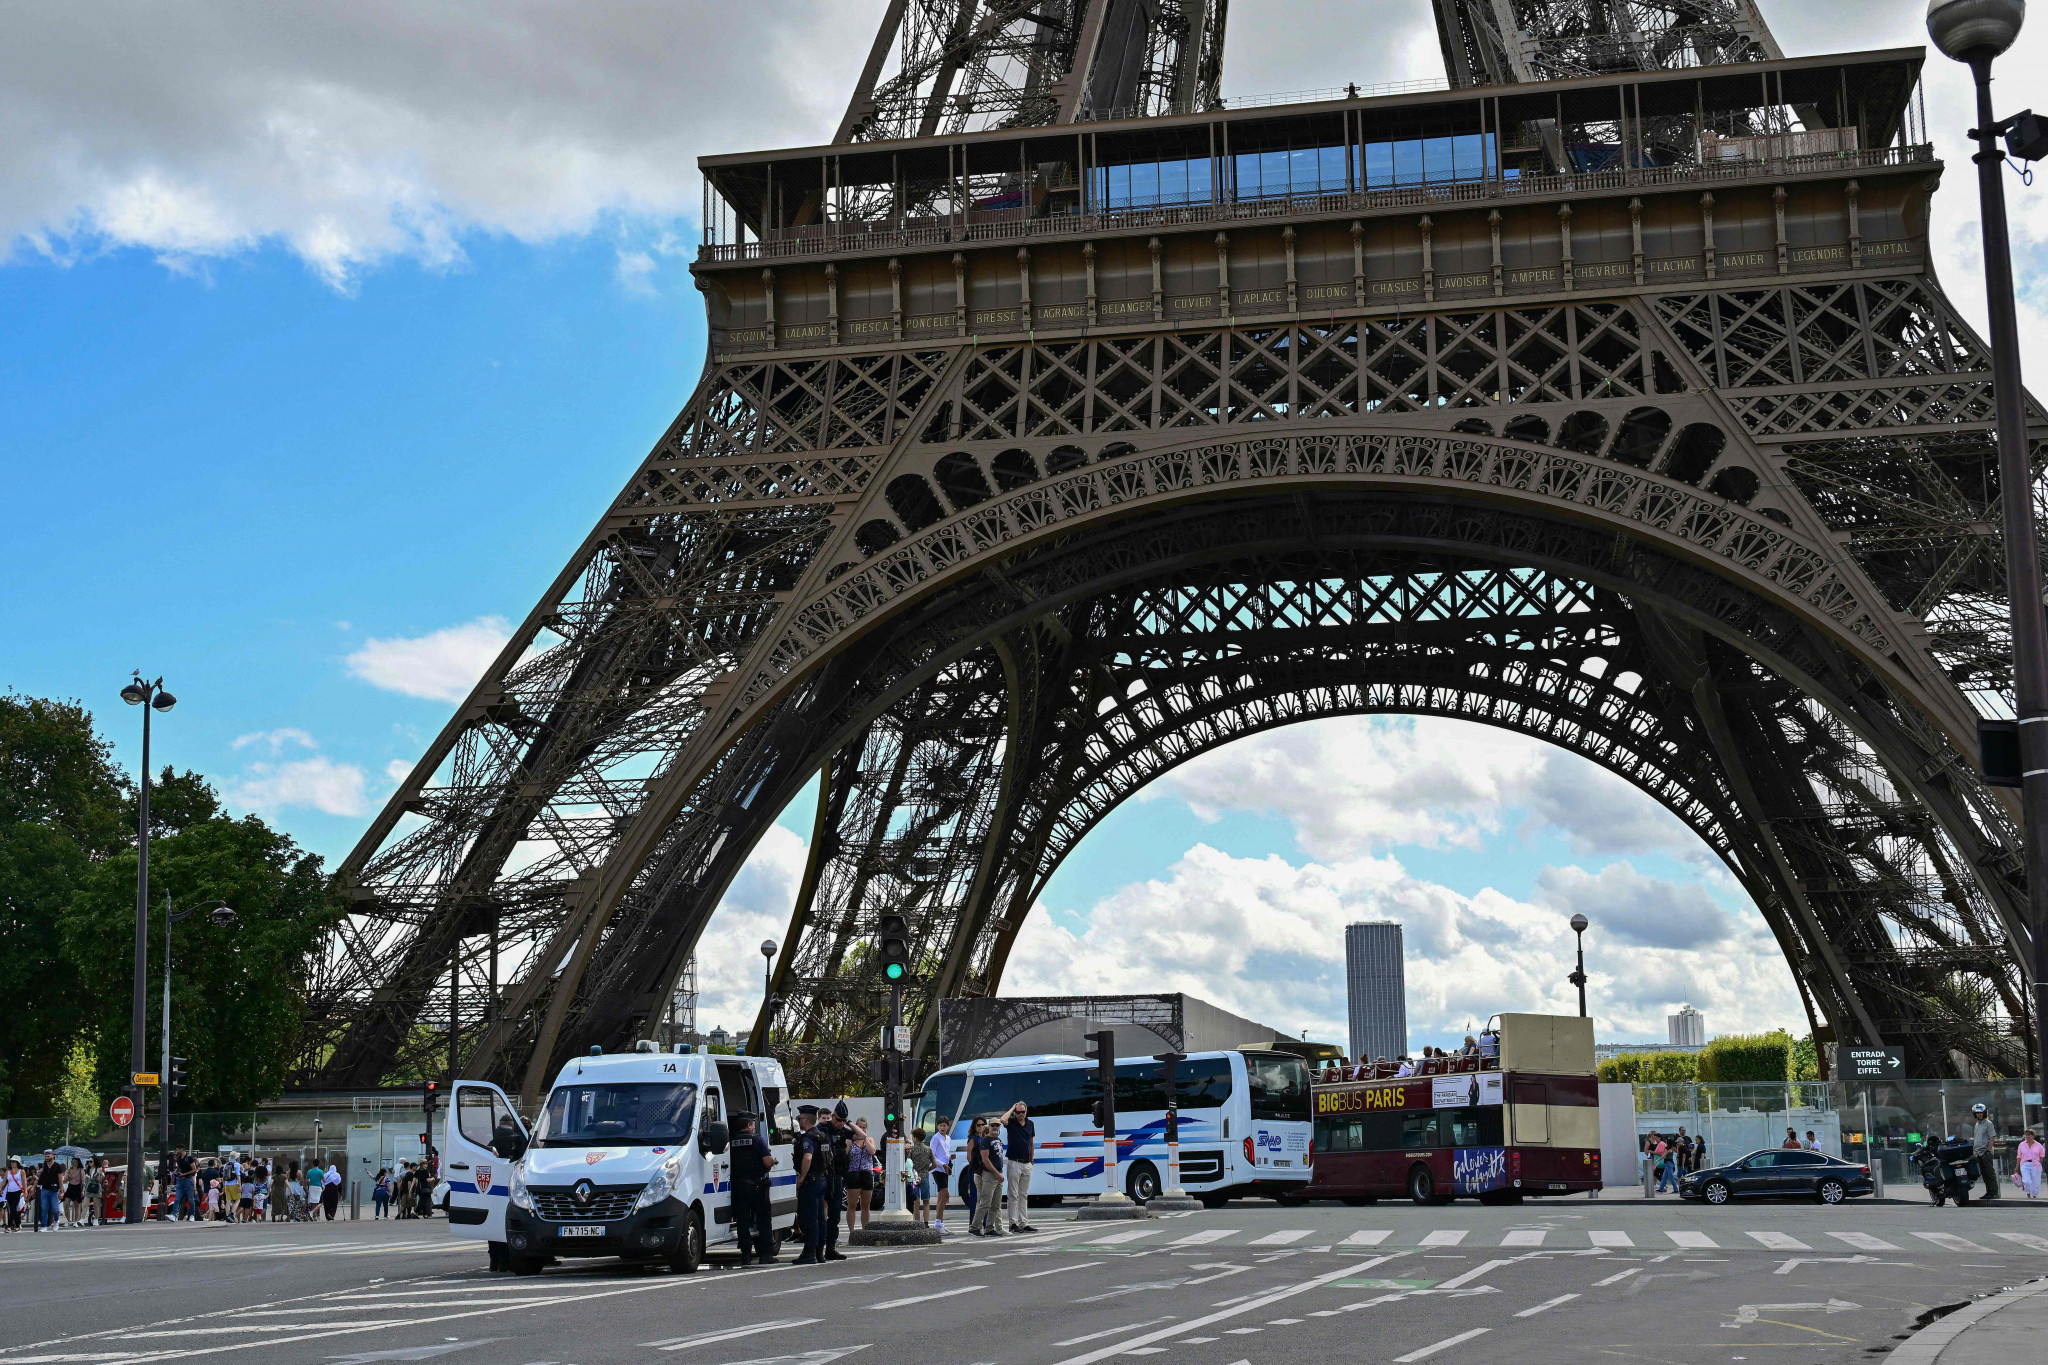 Three people have been arrested after coffins were found neat the Eiffel Tower. GETTY IMAGES